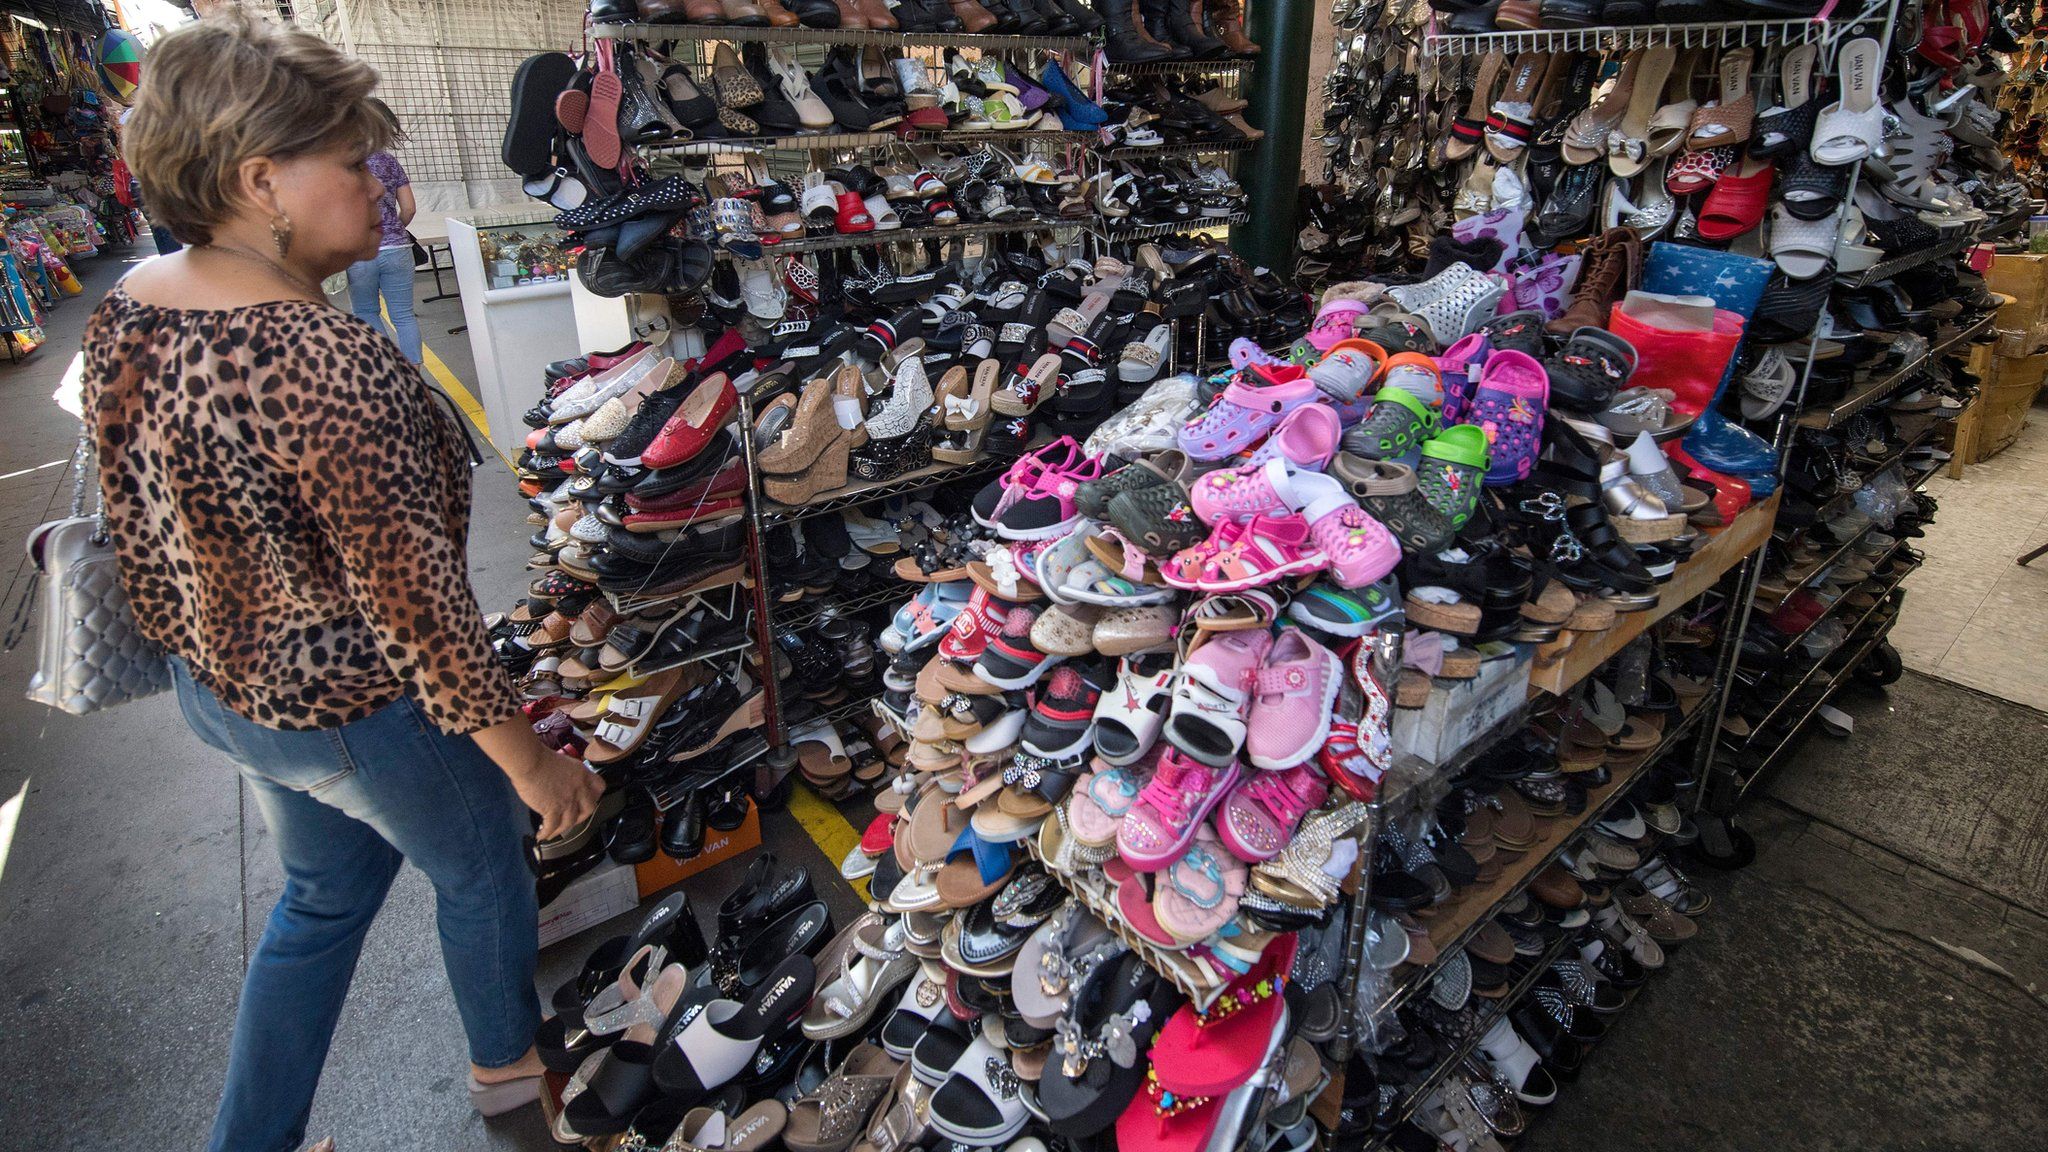 A woman shops for Chinese made shoes at a store in the Chinatown area of Los Angeles, California on August 24, 2019